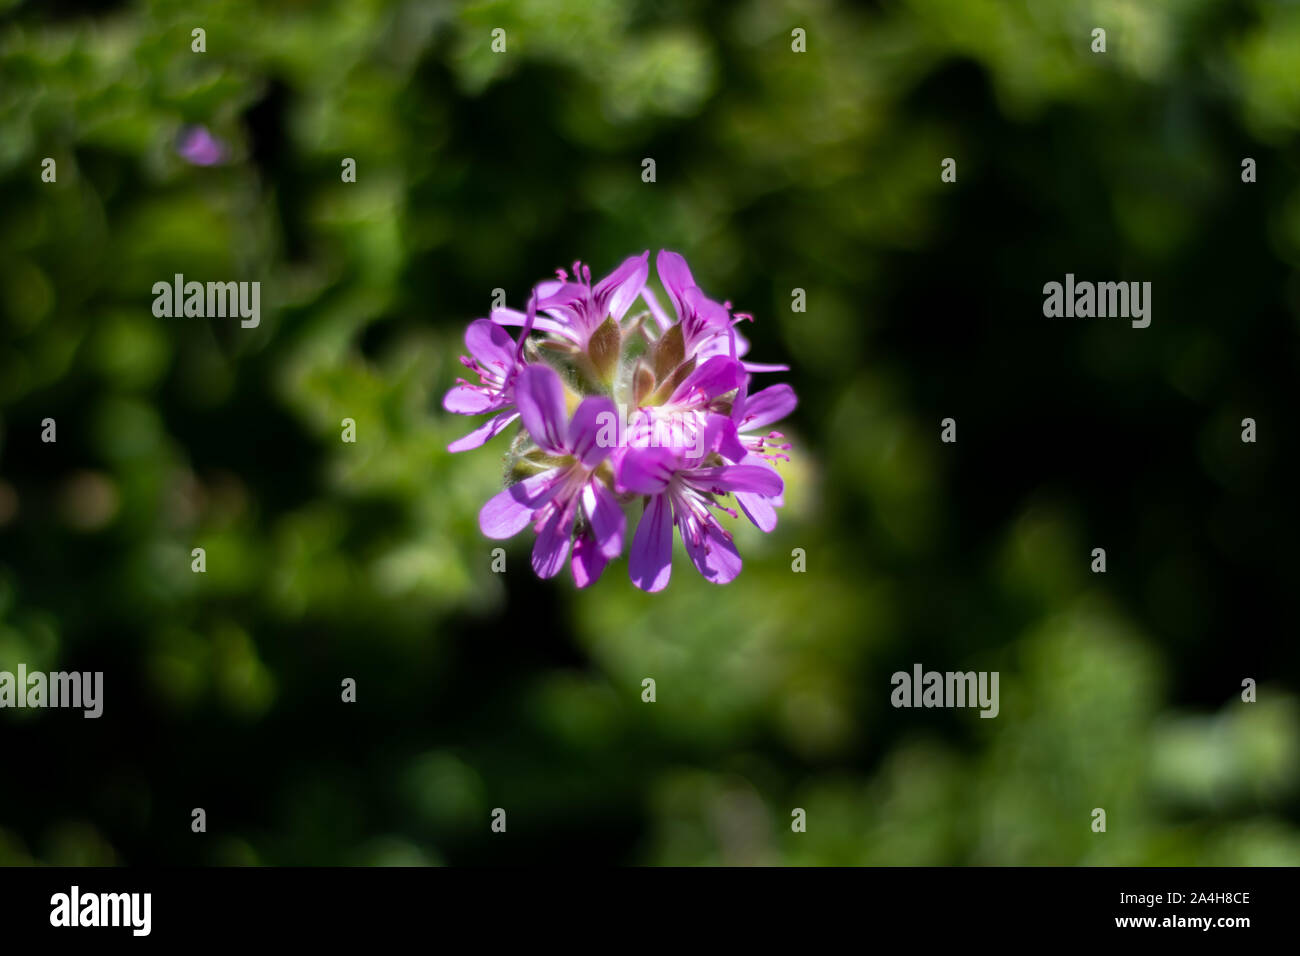 Close-up photo of purple flower over blurred background Stock Photo